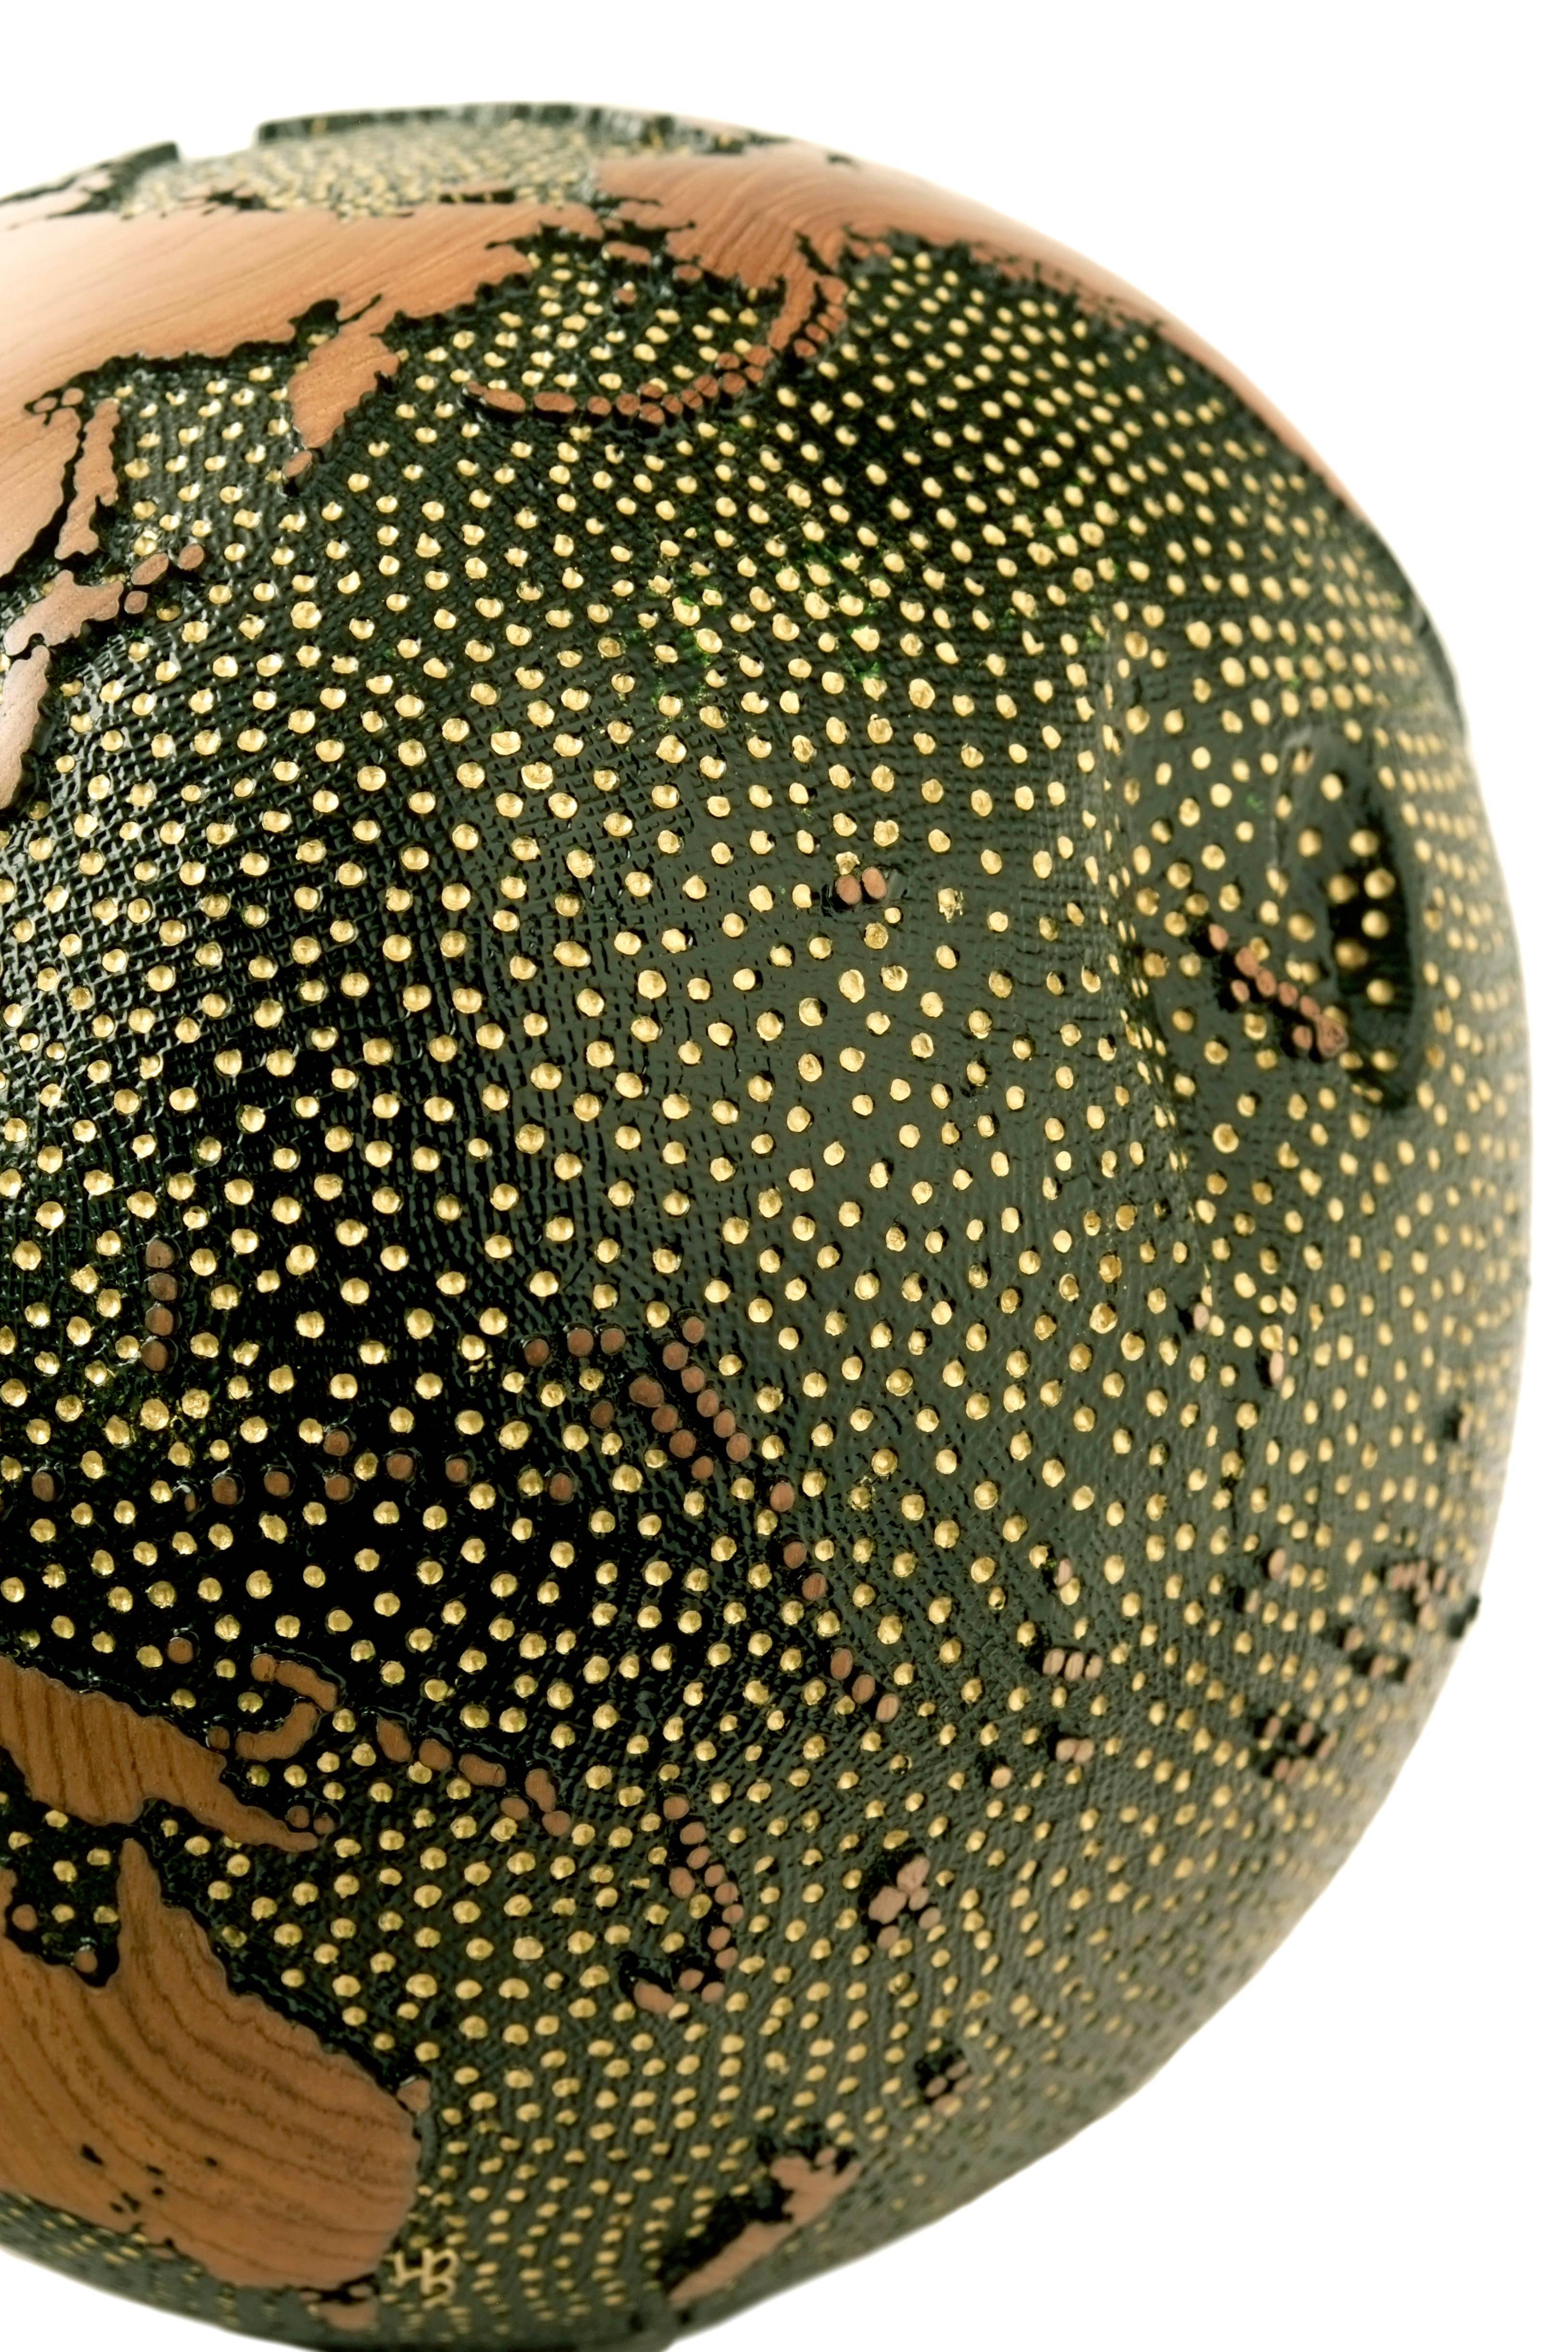 Gold Earth Stars Globe, made of teak root, vitrail, gold paint, hammered texture 30cm